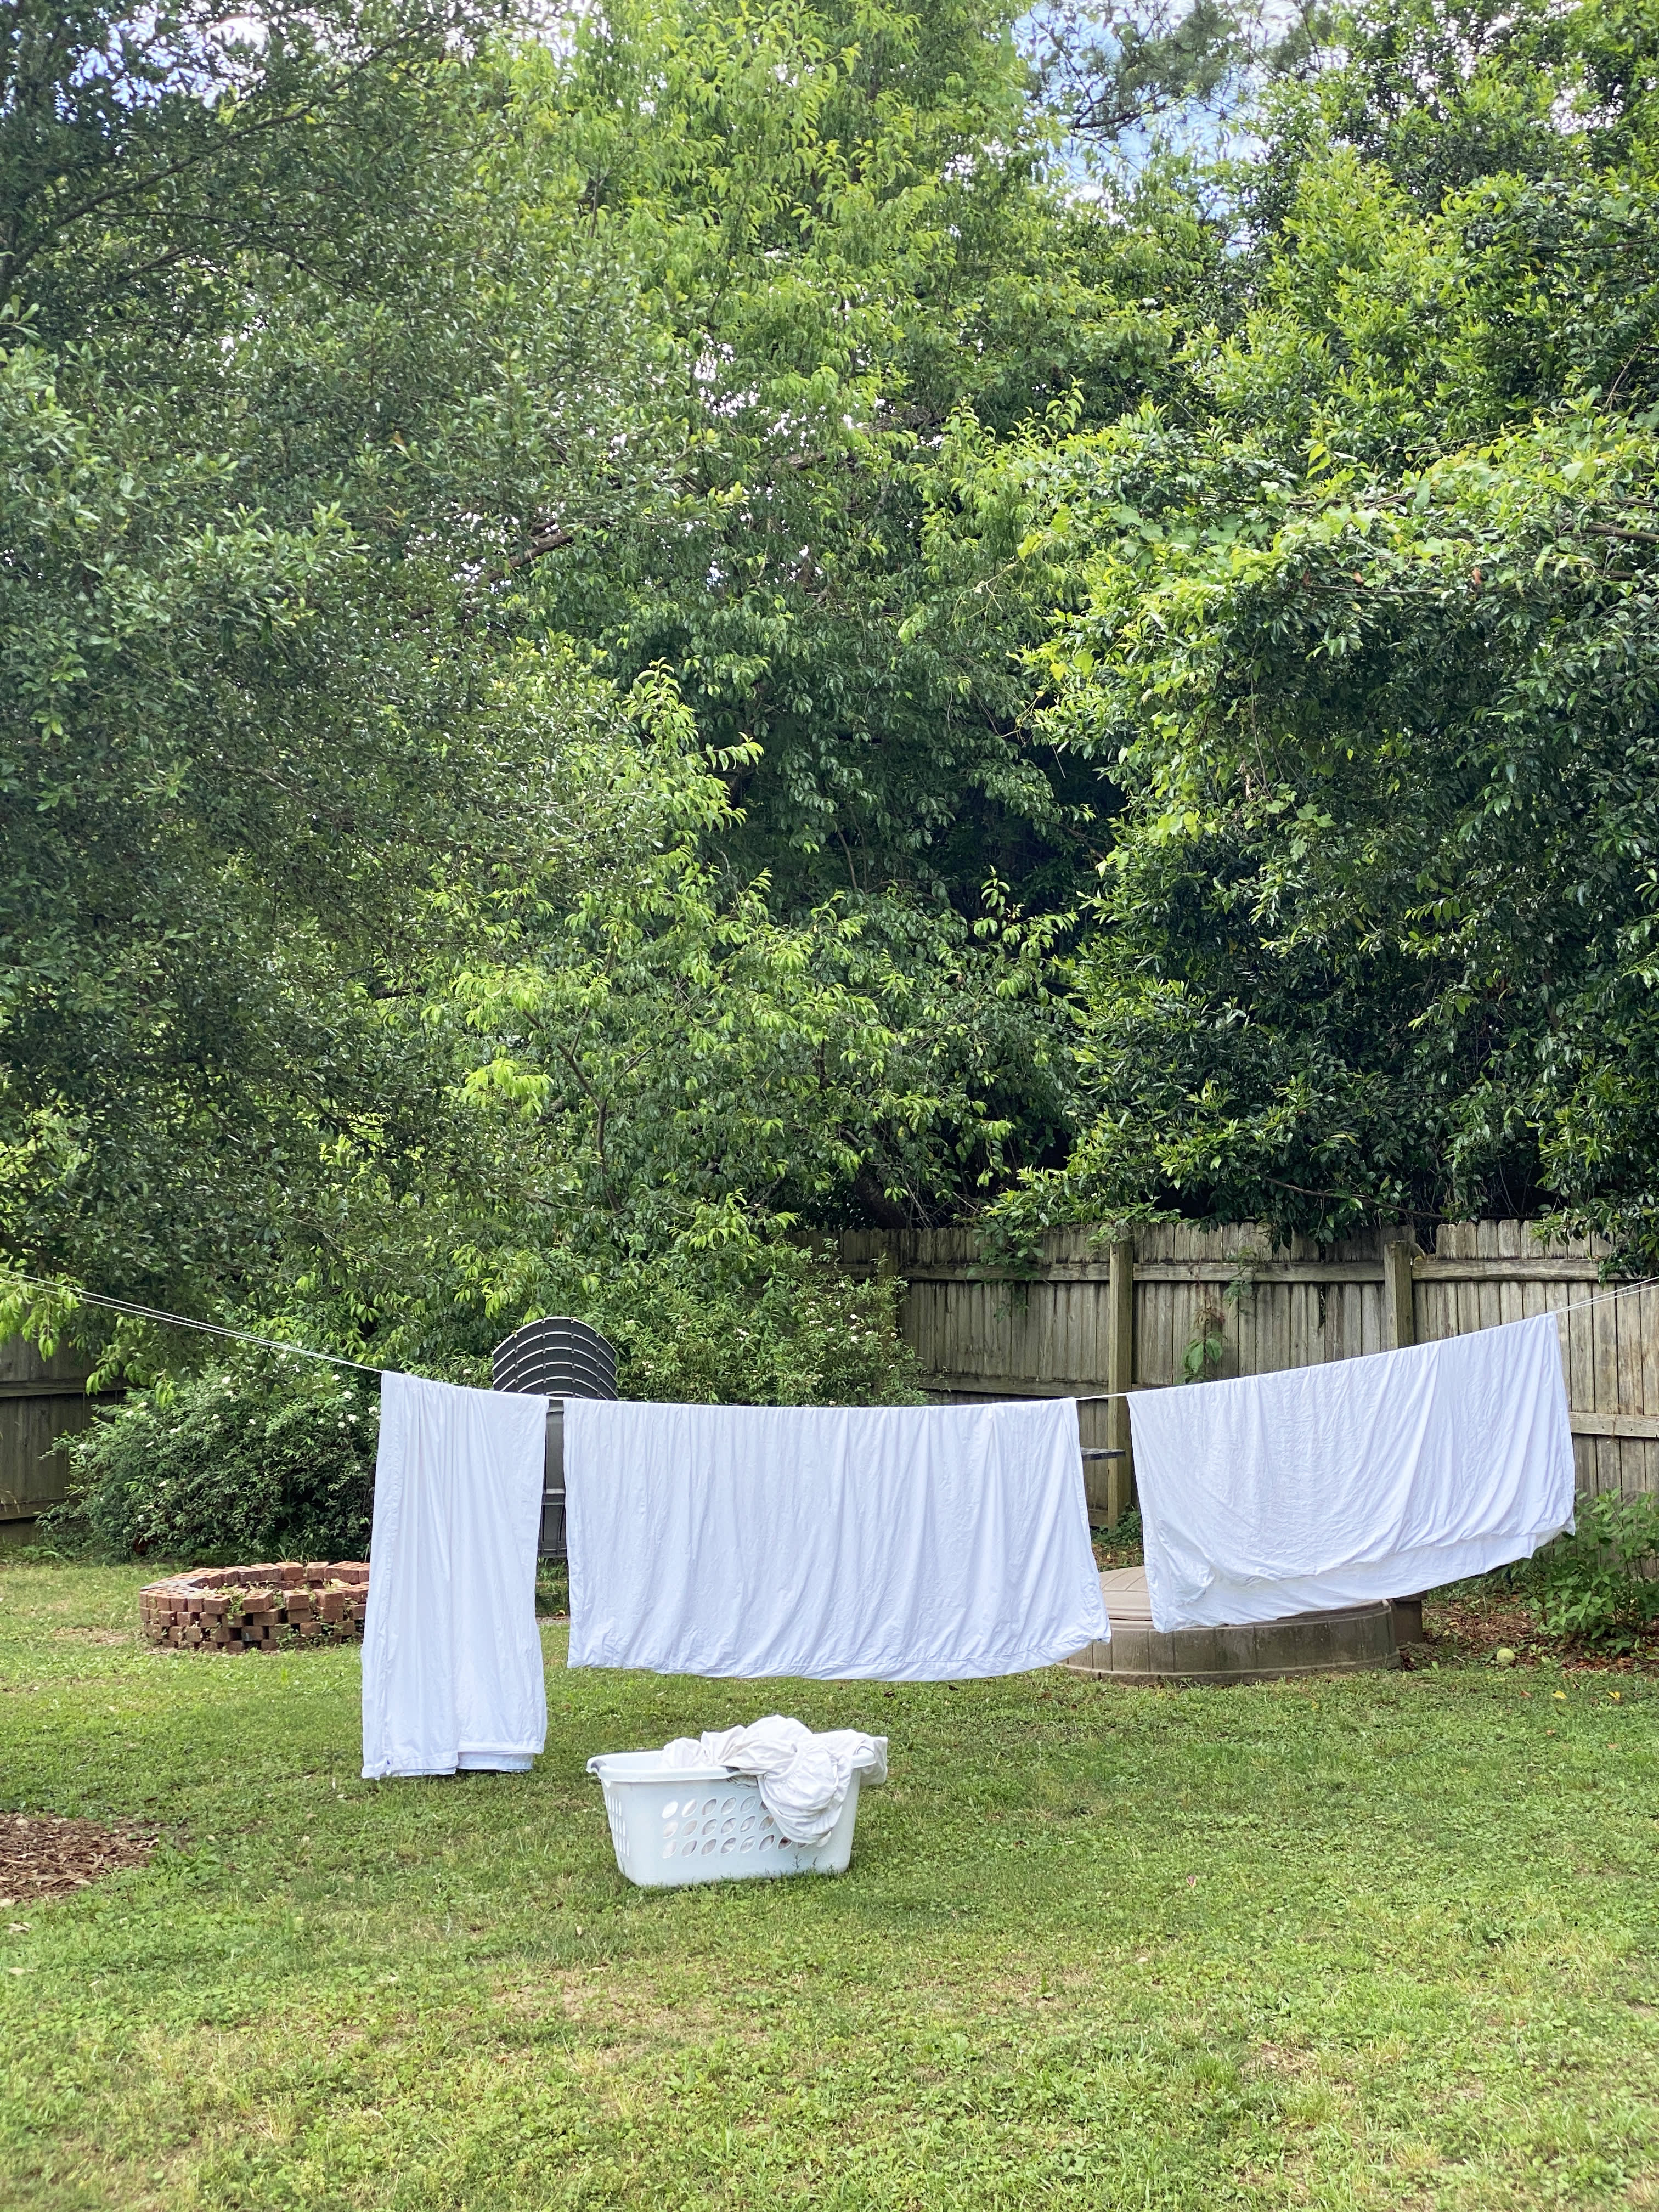 Retractable Clothesline: Air dry your laundry easily and